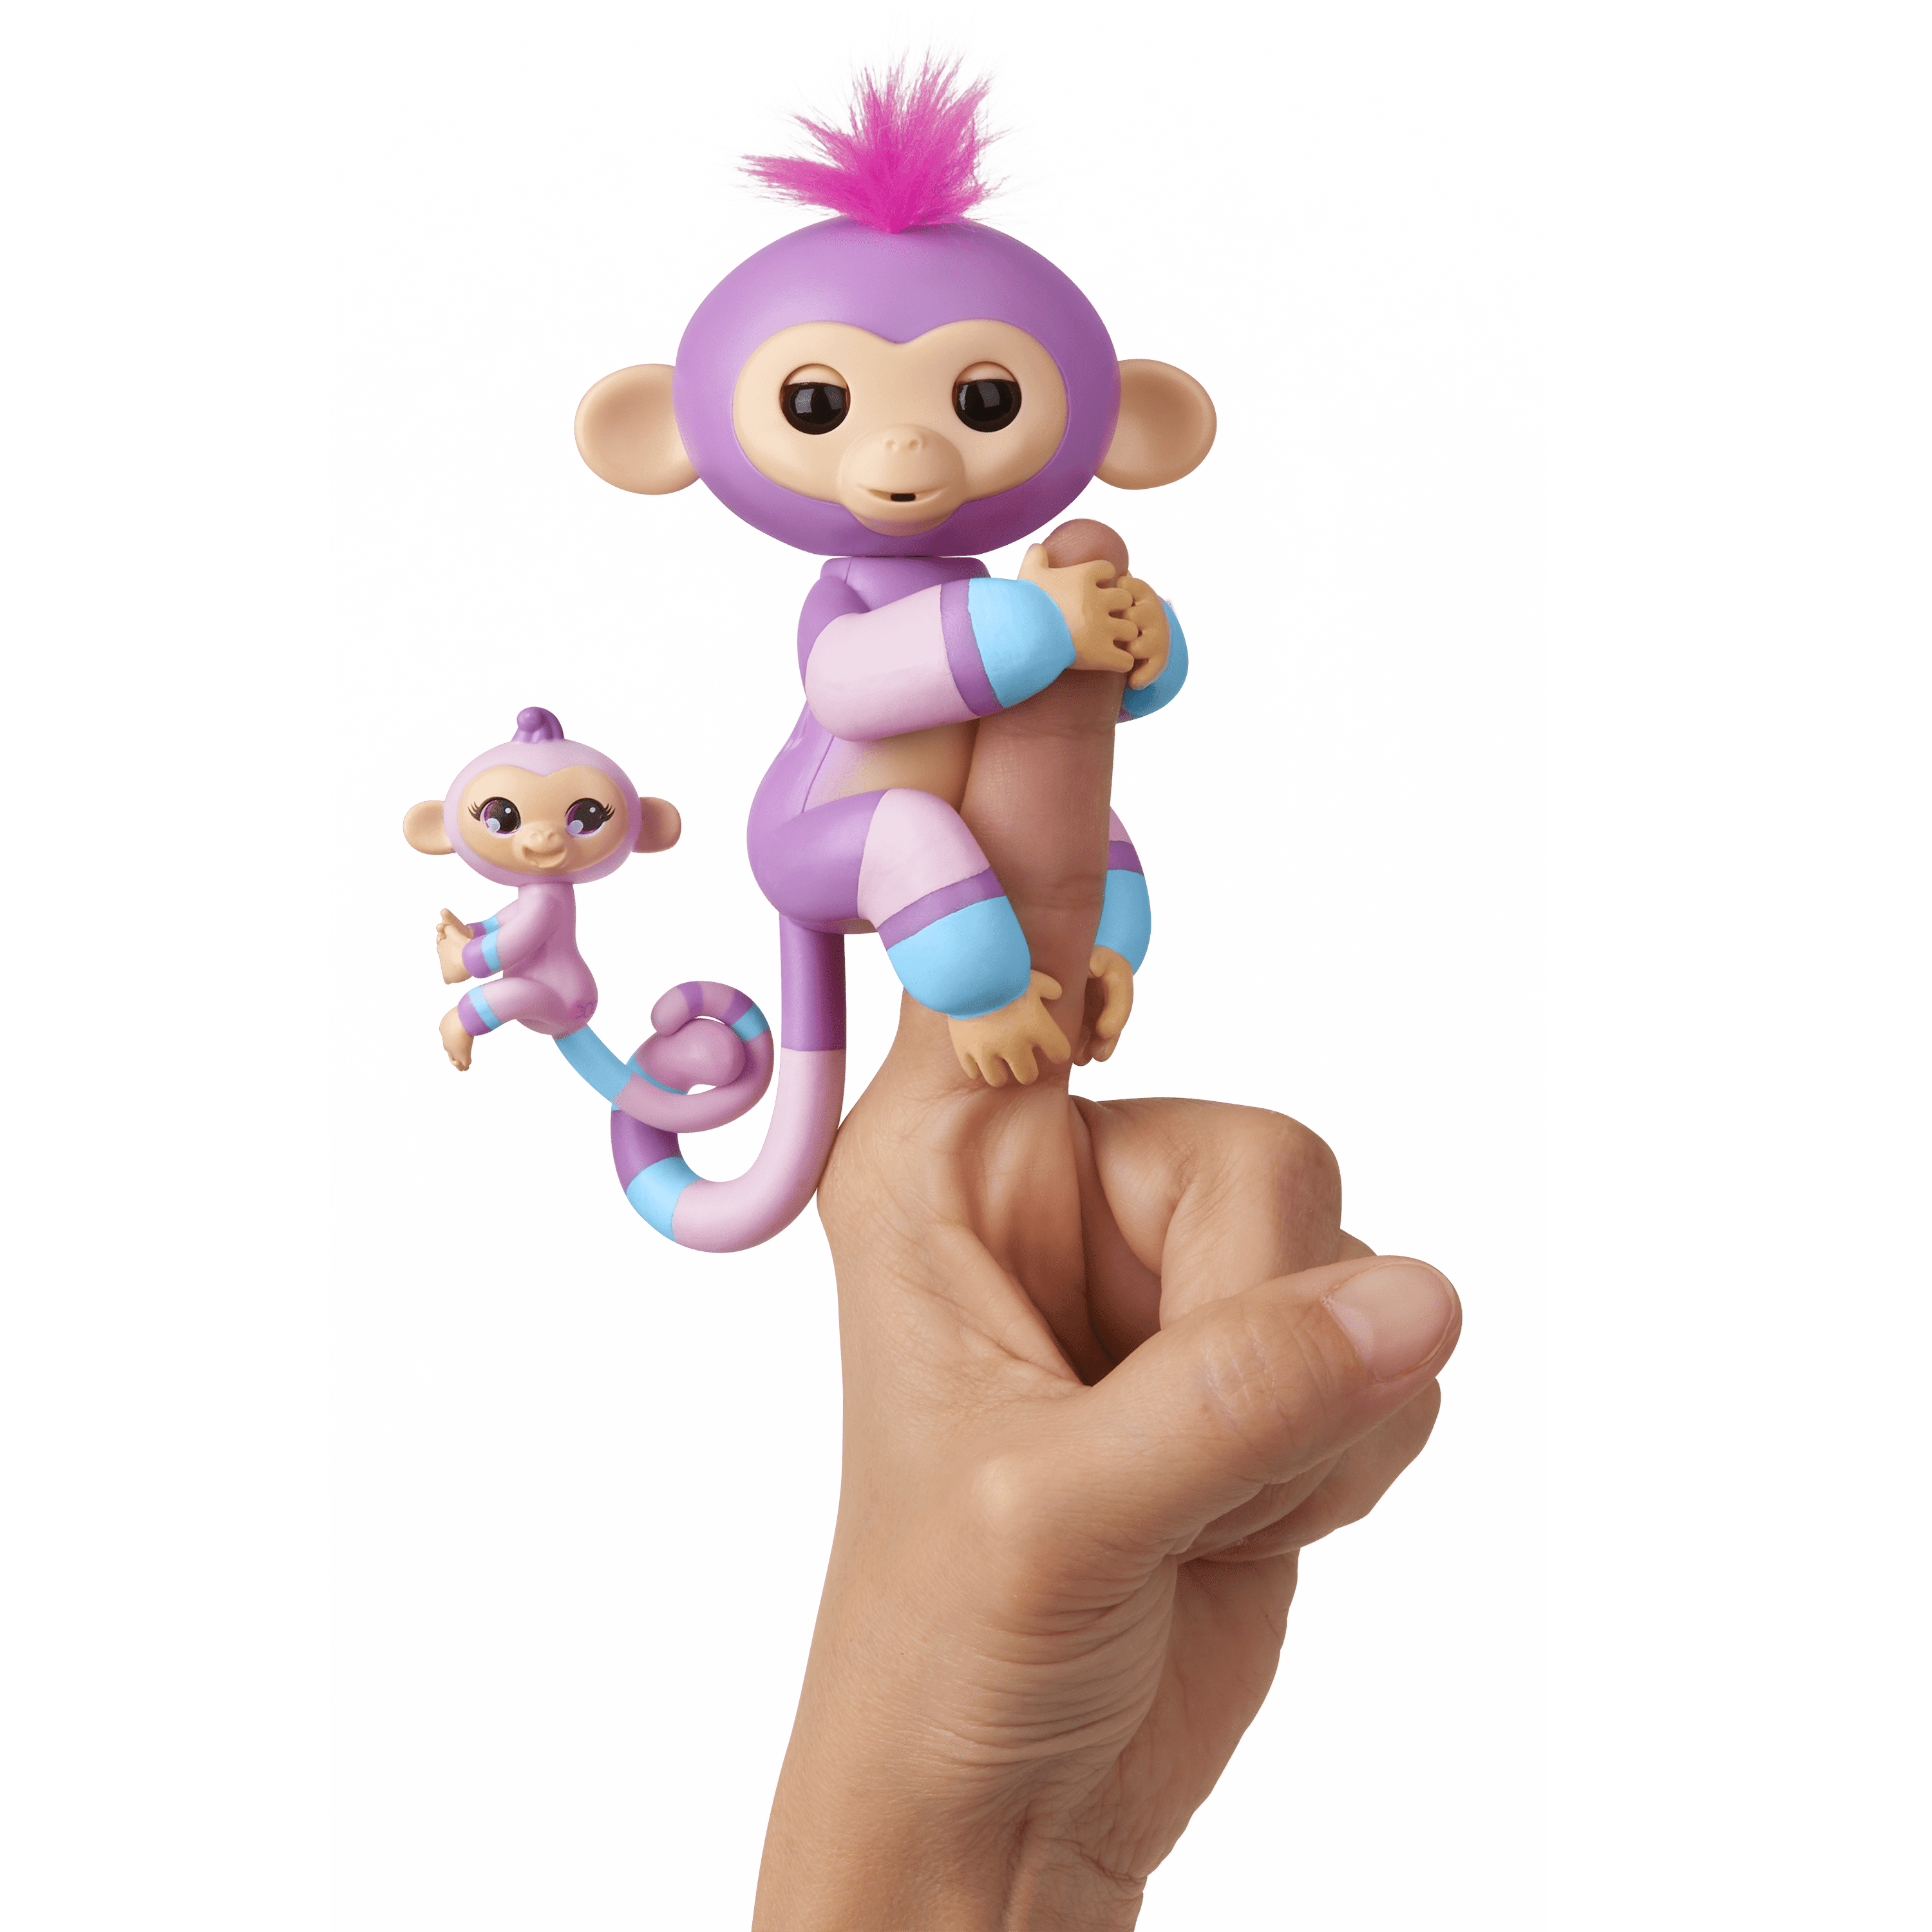 8 REPLACEMENT BATTERIES FOR WowWee FINGERLINGS Electronic Baby Monkey Unicorn 